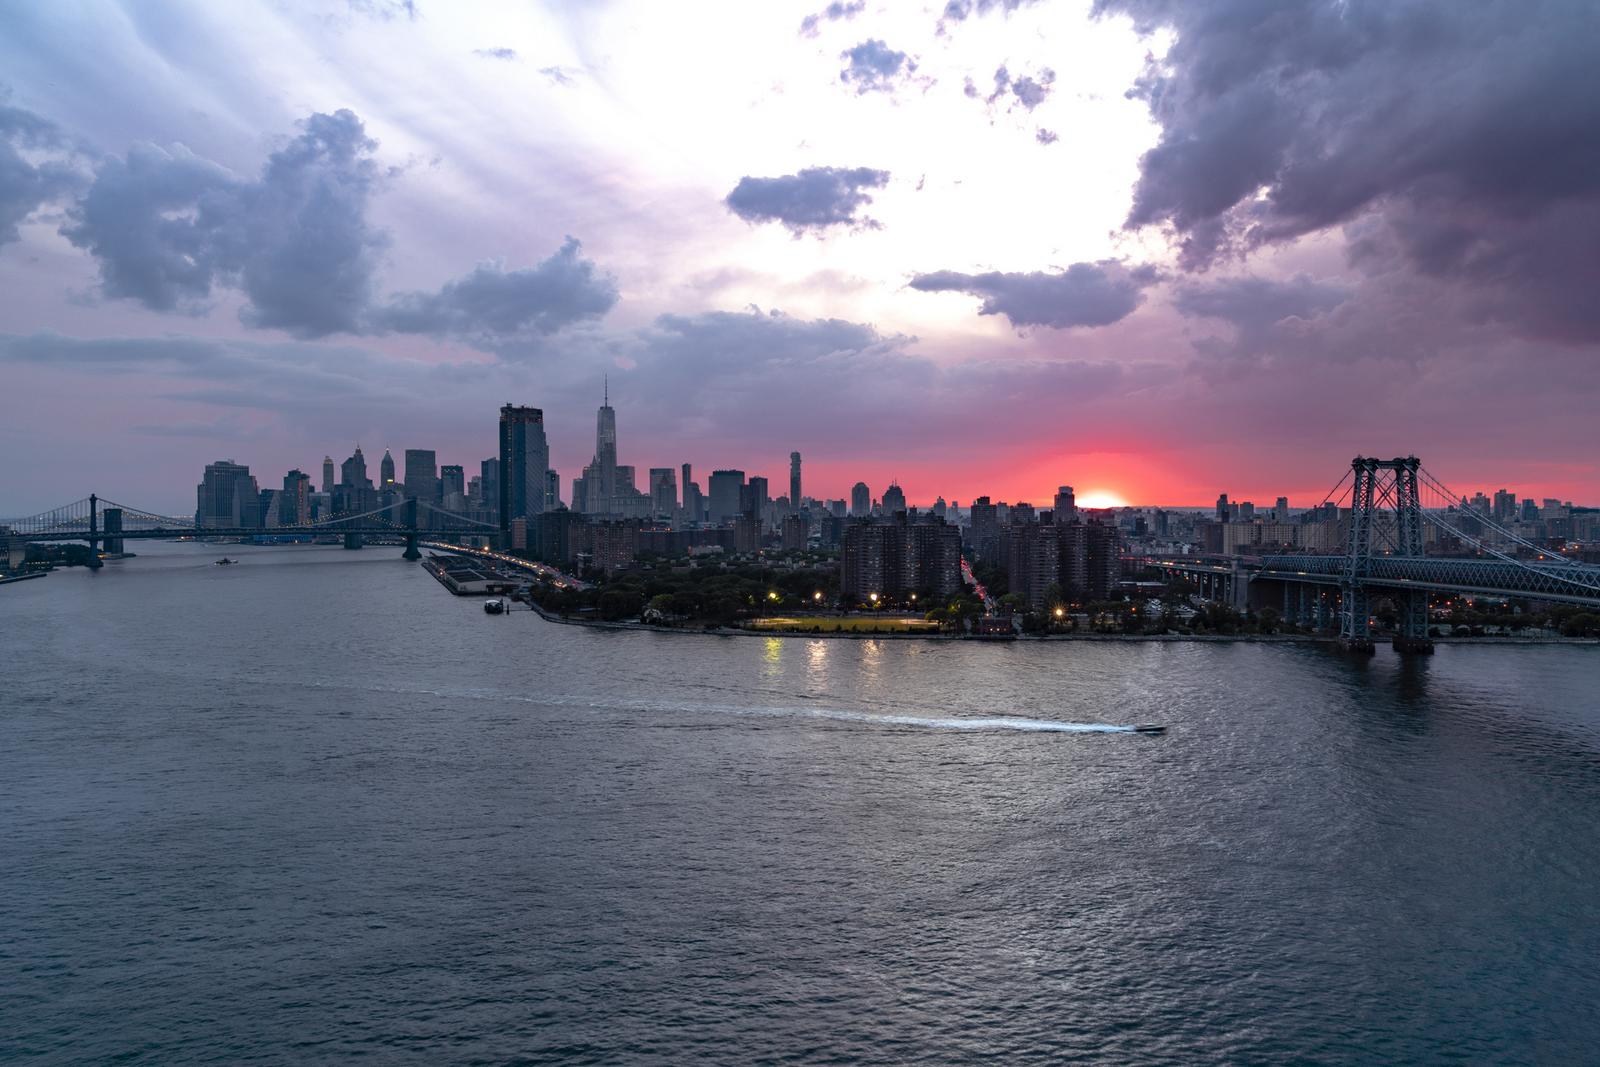 Sunset View of River, City and Williamsburg and Brooklyn Bridges